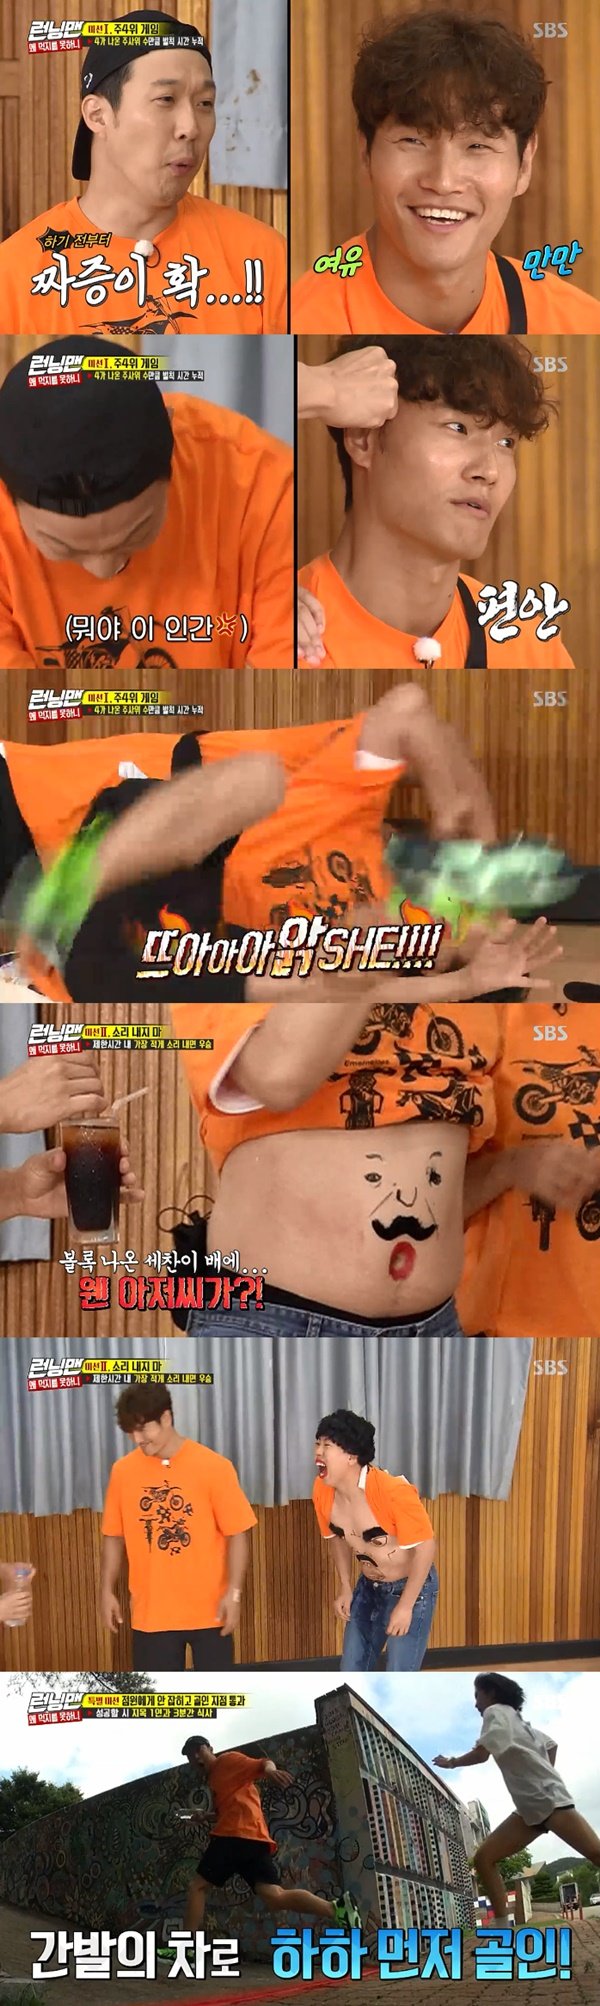 On SBS Running Man broadcasted on the 4th, they played games with food they wanted to eat.Kim Jong-kook was confident that he did not feel pain; Haha struggled to tear Kim Jong-kooks sideburns.Haha attacked for seven seconds, but Kim Jong-kook did not move; Kim Jong-kooks counterattack followed; Haha eventually became unbearable and screamed in a single voice.The victory went to Kim Jong-kook as everyone expected.But Kim Jong-kooks Choices card was a 10-second meal for me. Everyone cheered on the unexpected result.Kim Jong-kook could be eaten by a Choices one; Haha appealed to compassion; Kim Jong-kook choices Haha.The second round was a loud, laughing-bearing showdown. Everyone could not stand the laughter, but Kim Jong-kook remained expressionless in any attack.Kim Jong-kook won the victory, laughing the least, although he was once funny because of Yang Se-chan and Haha; but luck did not follow; he plucked the pluck and got no benefit.The next round was a common sense quiz, and both teams boasted their ability to be in a hurry (?), and Kim Jong-kook, who had one problem, won.The four had scissors rocks and got the chance as Jeon So-min beat Kim Jong-kook; Jeon So-min was given the SEK mission.However, the running was failed because of the fast-paced stall staff. The stall staff was Choi Soo-in, the Korean mid- and long-distance track and field star.In the final round, Song Ji-hyos performance won Yoo Jae-seok, Ji Suk-jin, Haha and Song Ji-hyo; Haha was to perform the SEK mission.Haha knew he was Choi Su-in and set up an operation and passed the goal score by a slight difference; Haha enjoyed a dinner with Song Ji-hyo in the envy of the members.The final penalty was received by Ji Suk-jin.